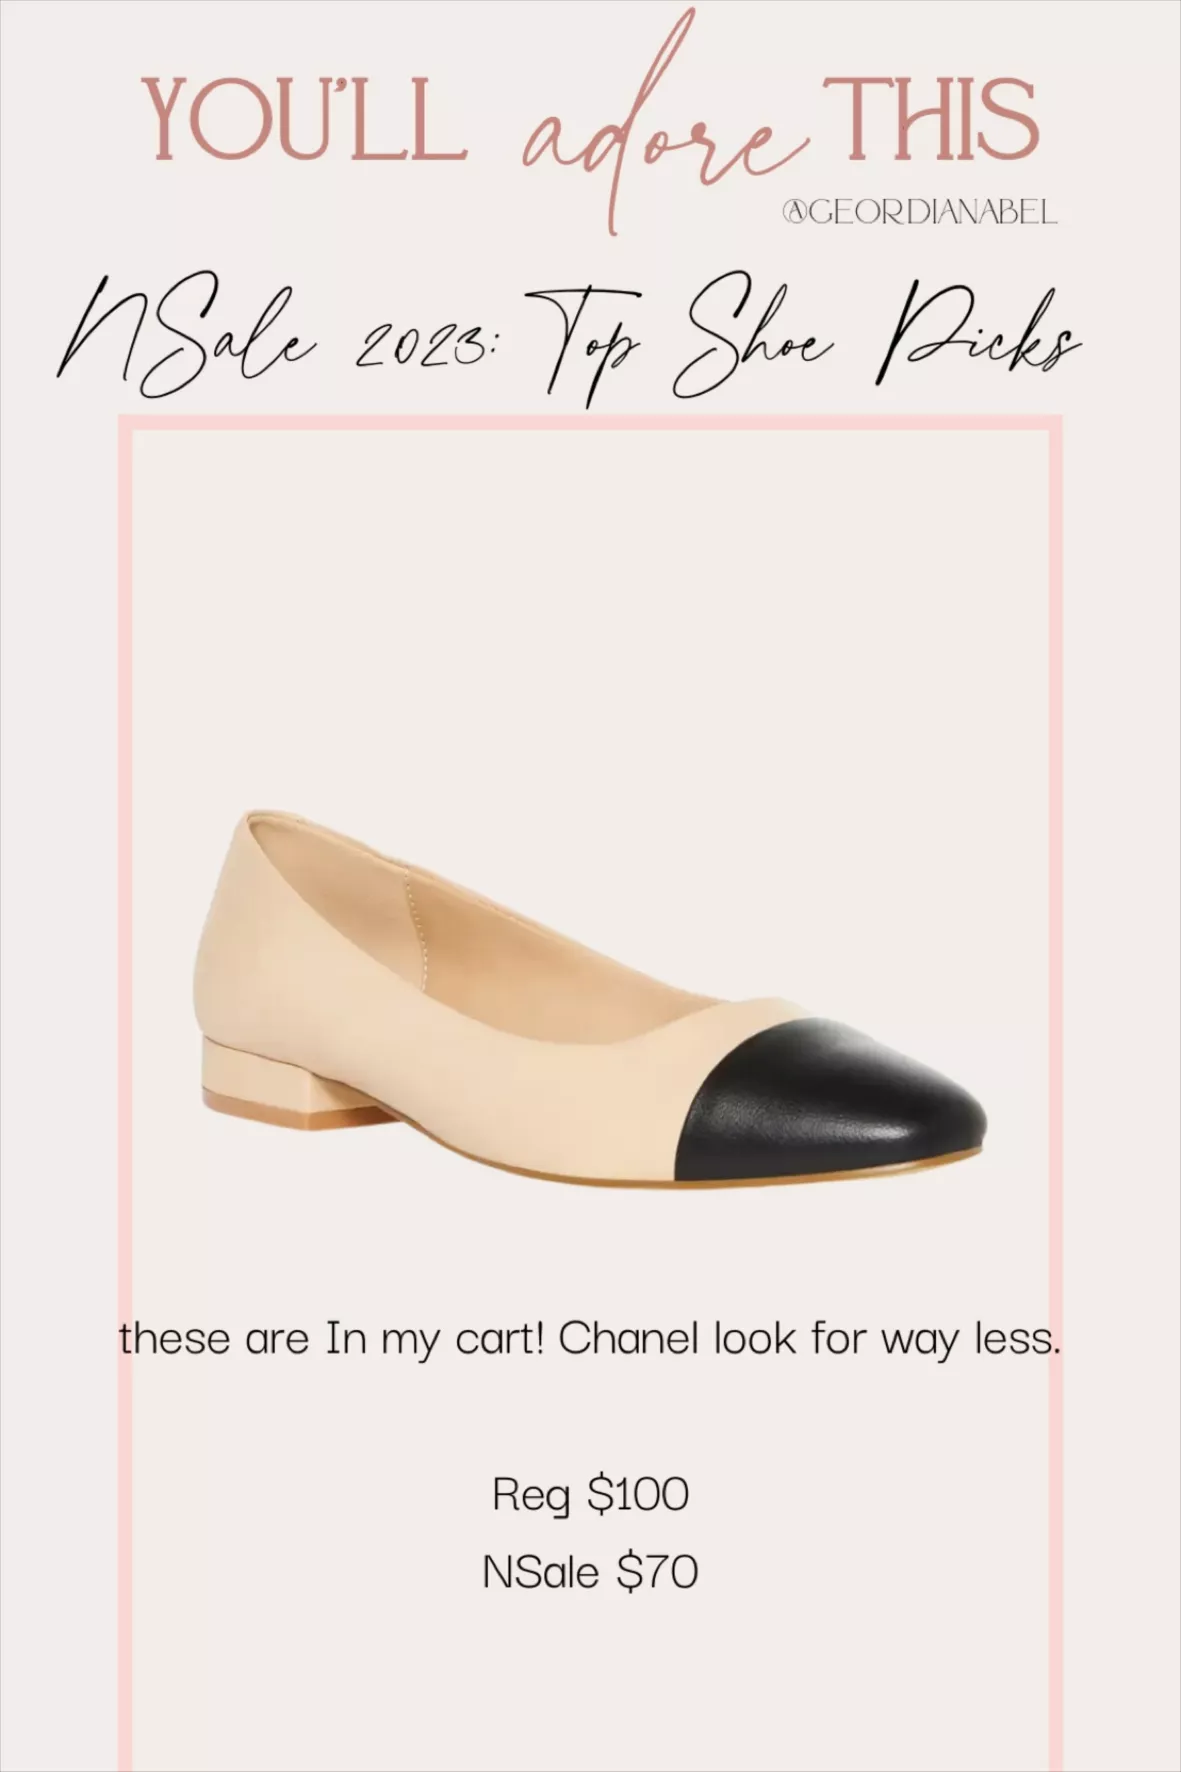 Chanel Ballerina Flats Look for Less + How To Wear Them in 2023